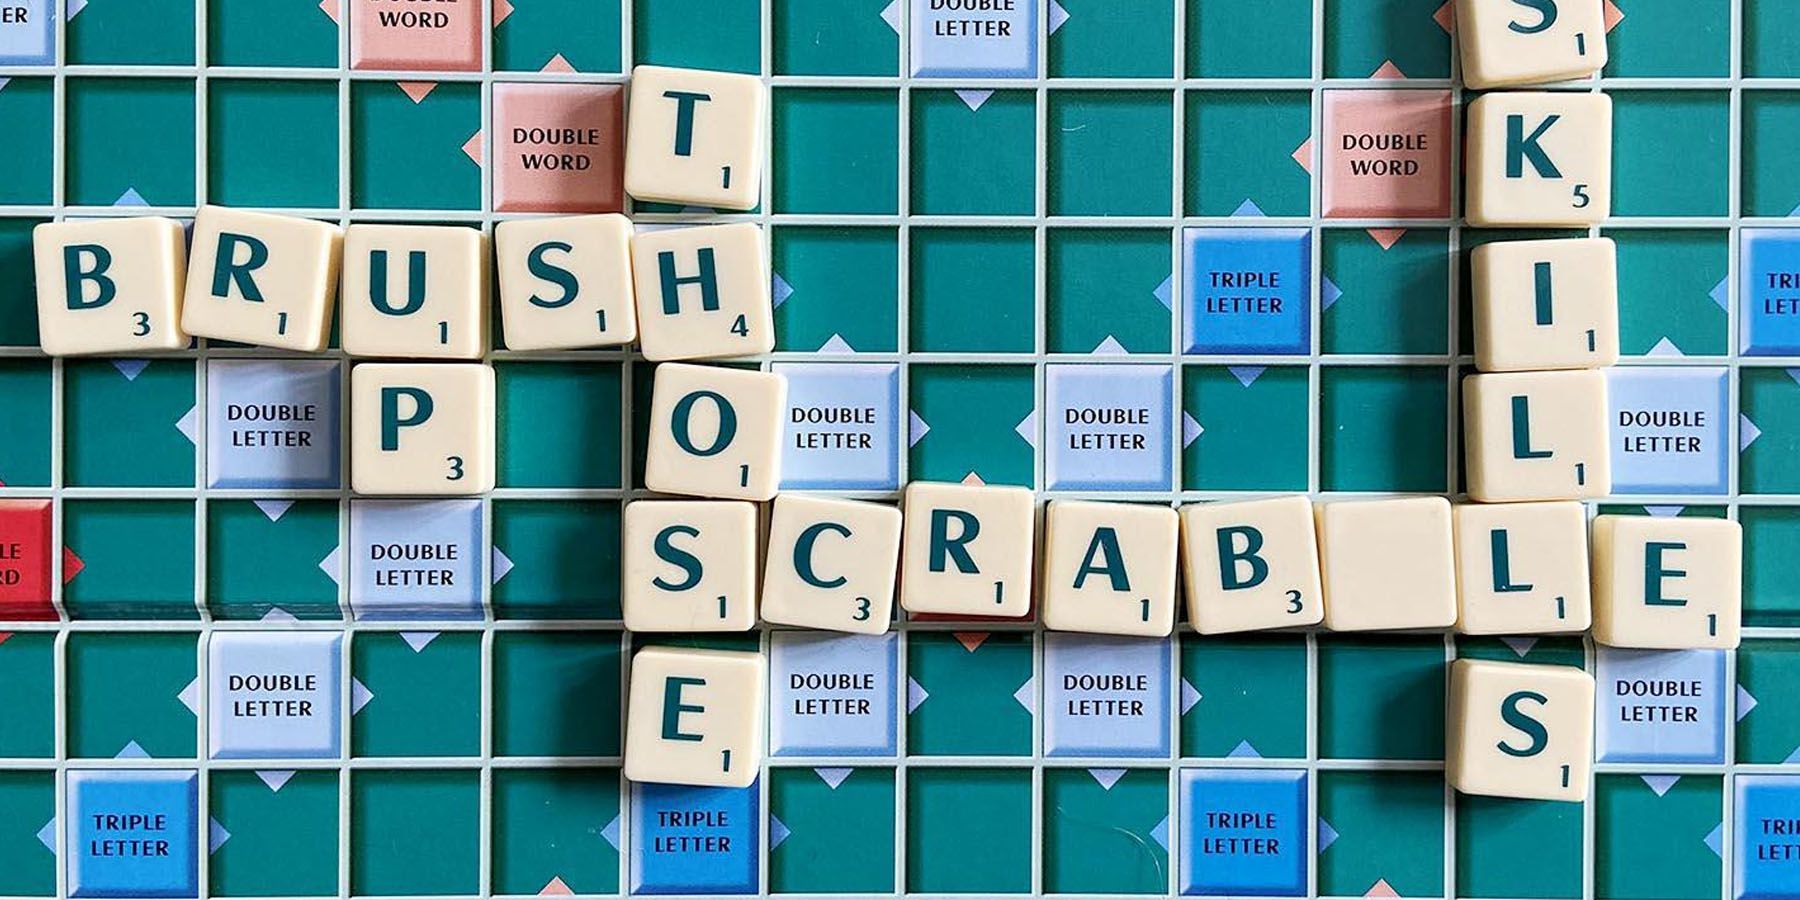 The word game Scrabble